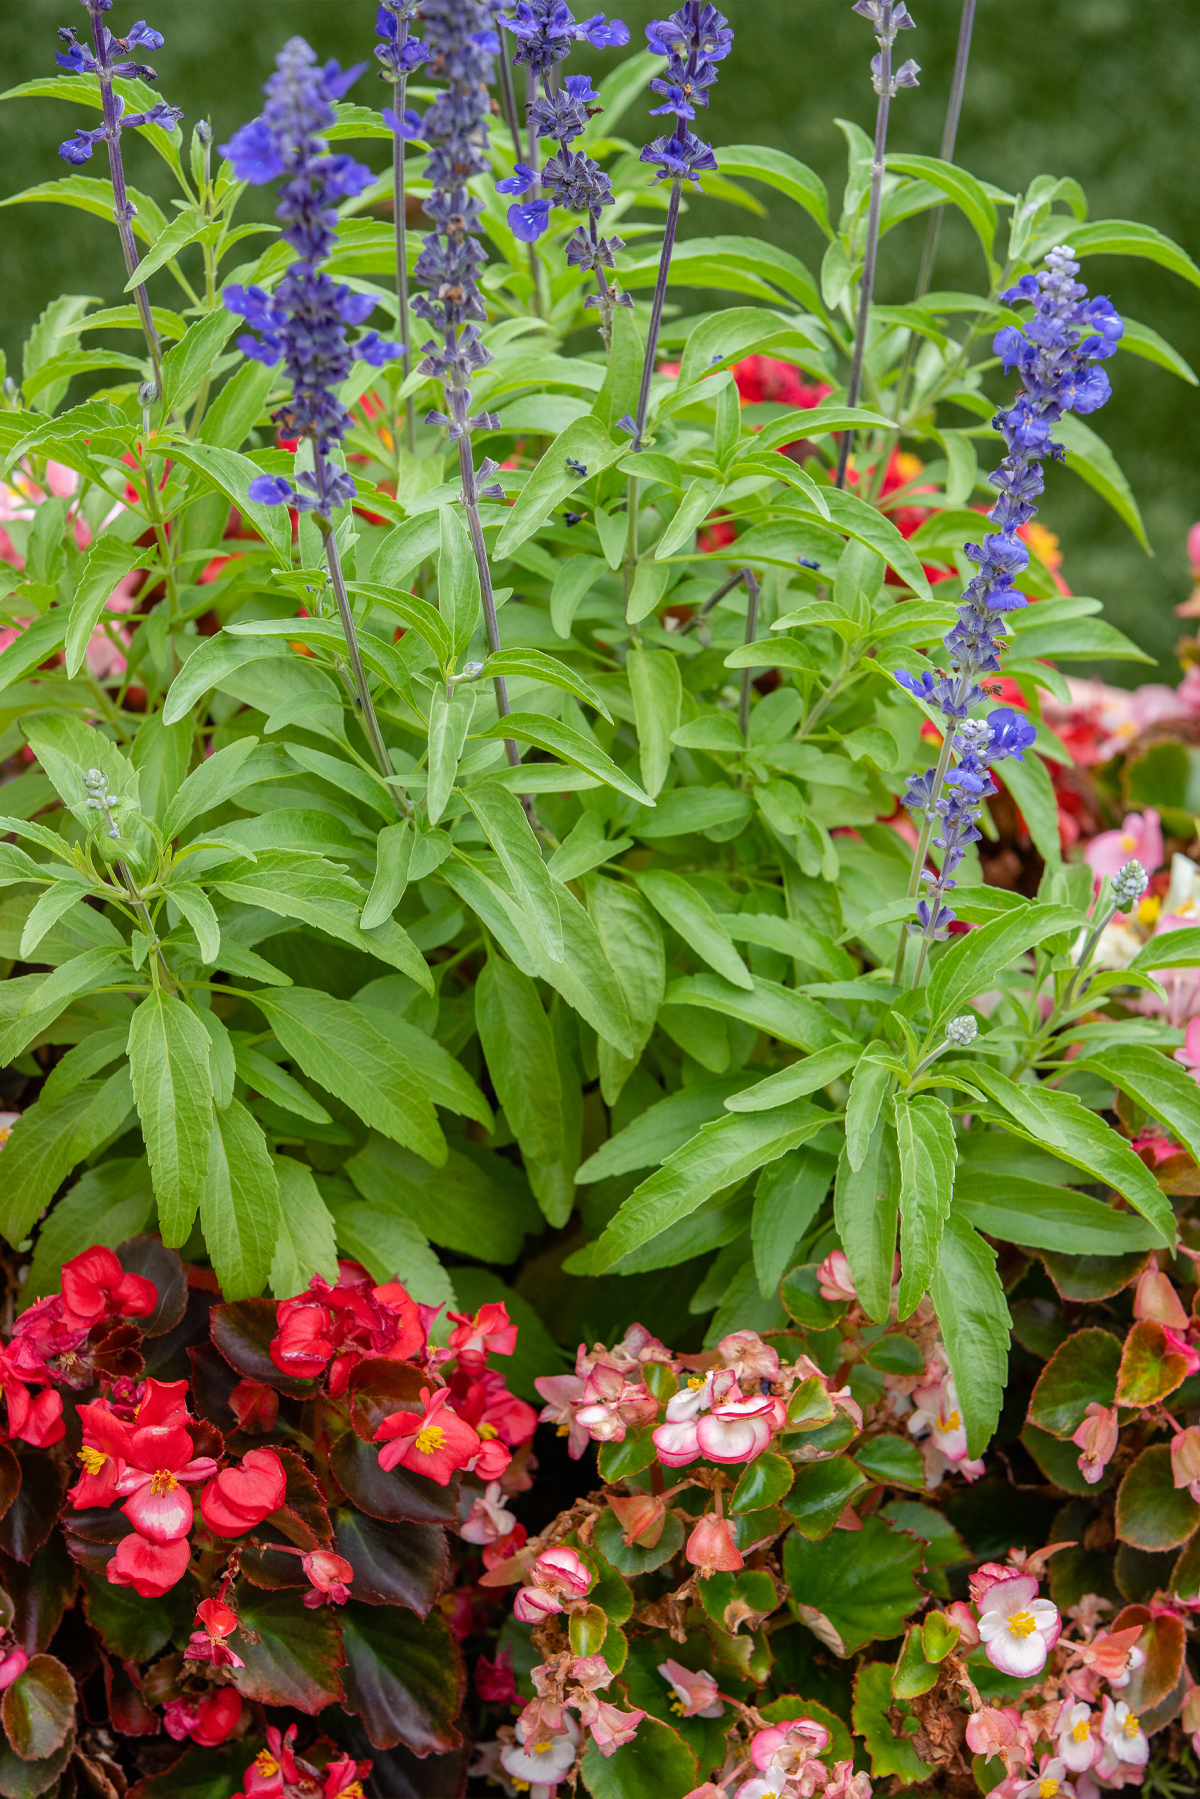 Close up image of floral planter with purple and red flowers